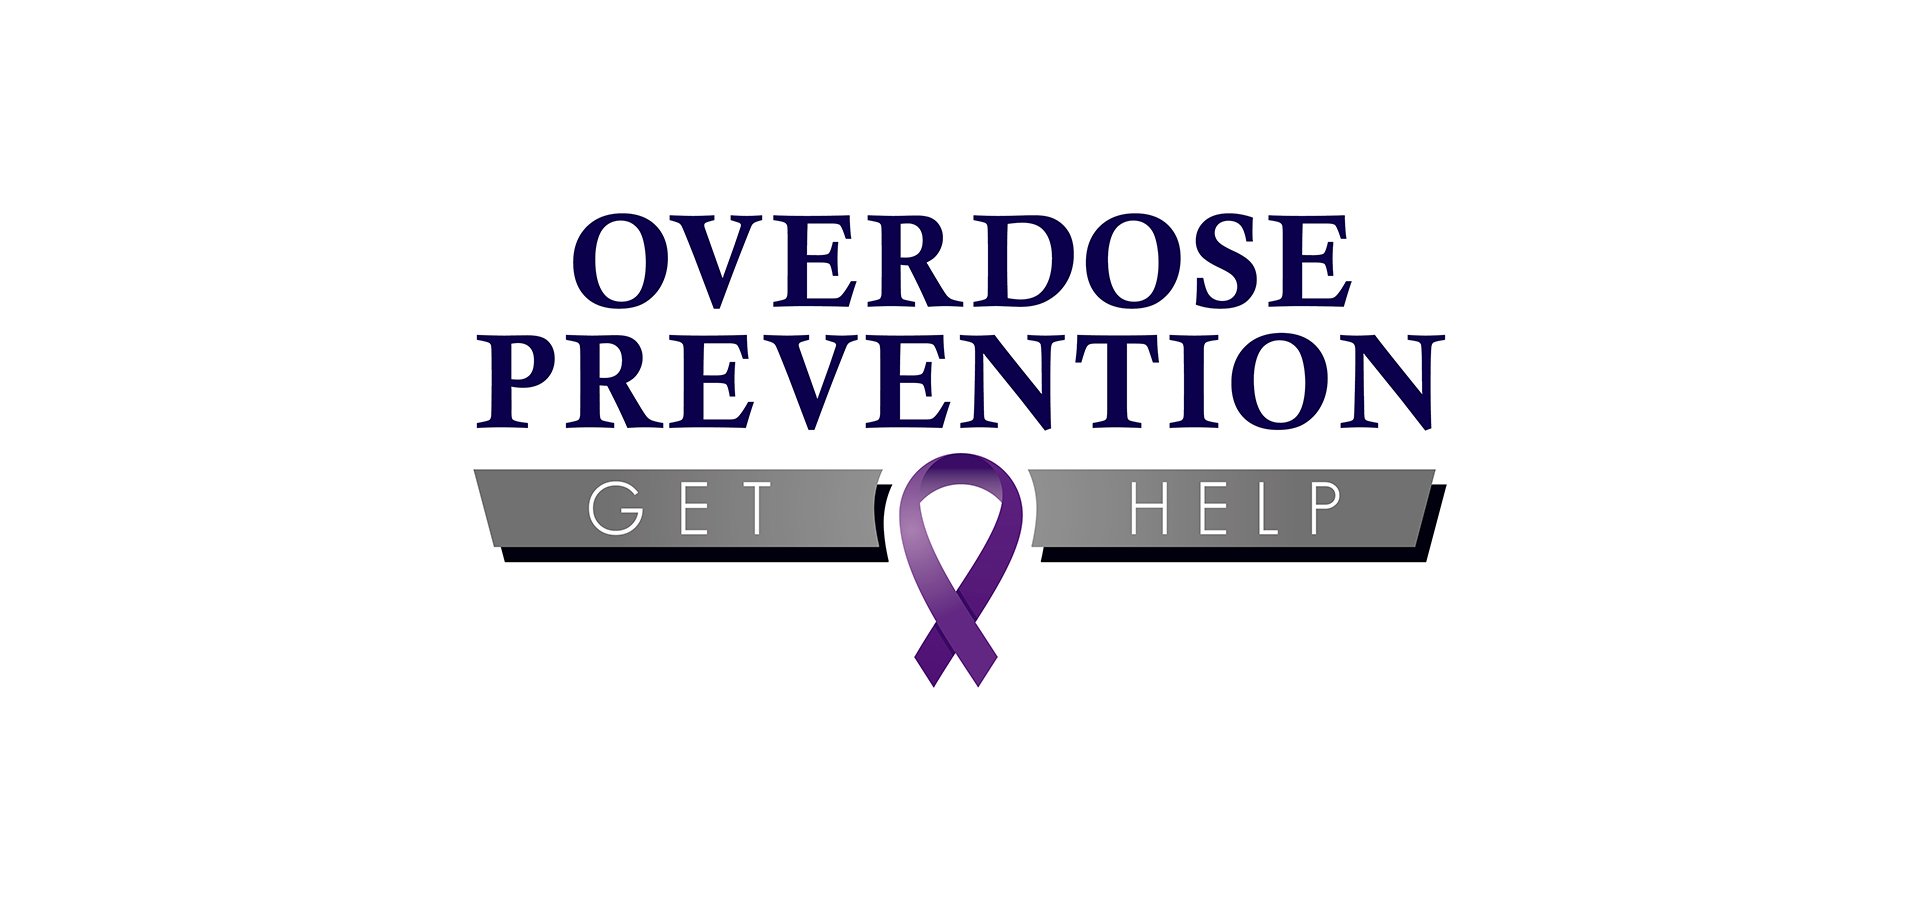 full overdose prevention advertisement reminds us of a columbine survivor and recovery advocate found dead